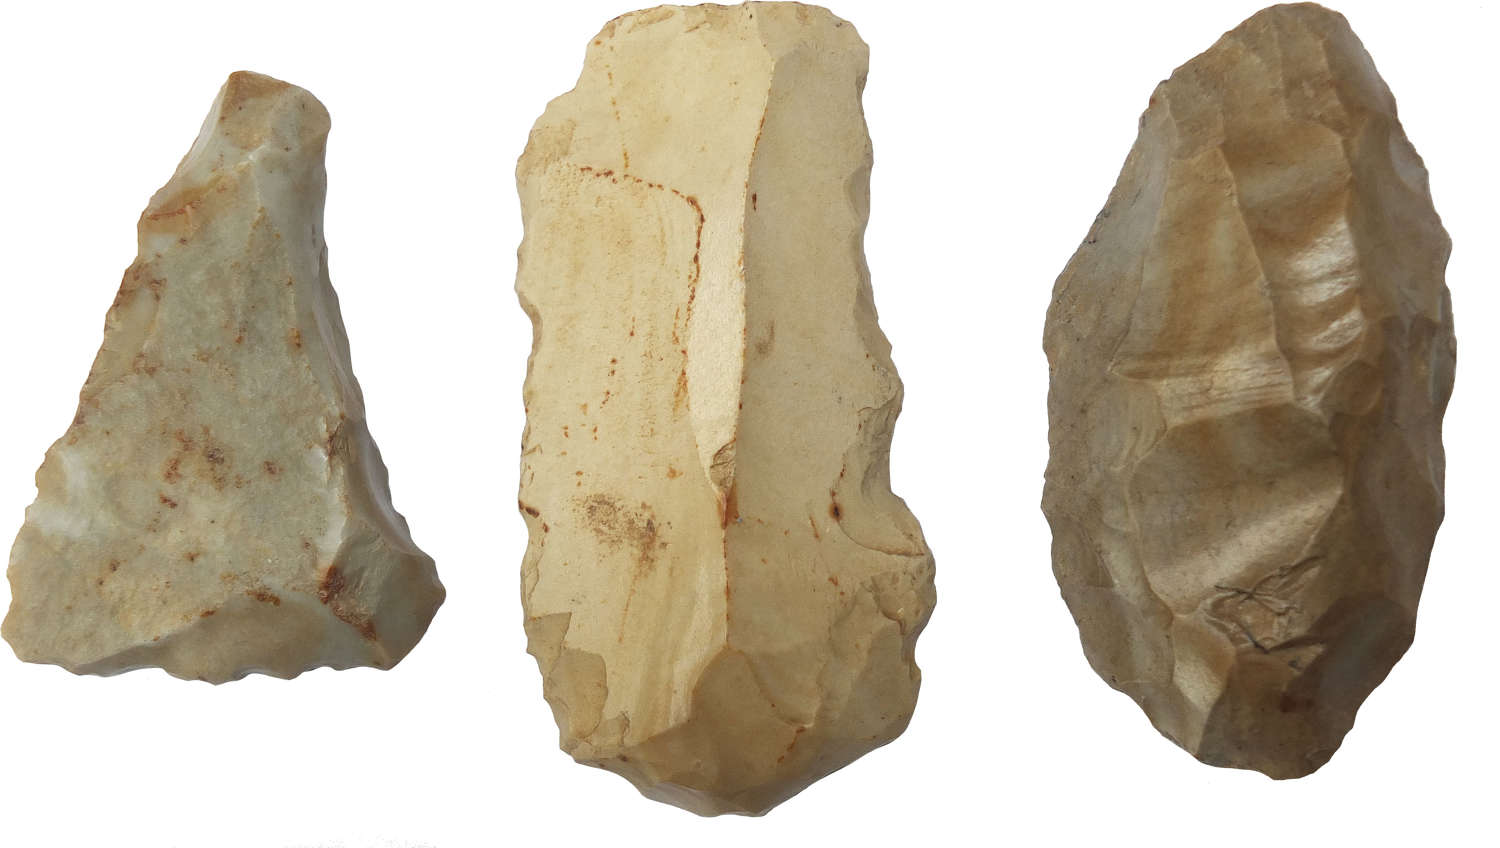 A group of three Neolithic to Early Bronze Age flint tools, France